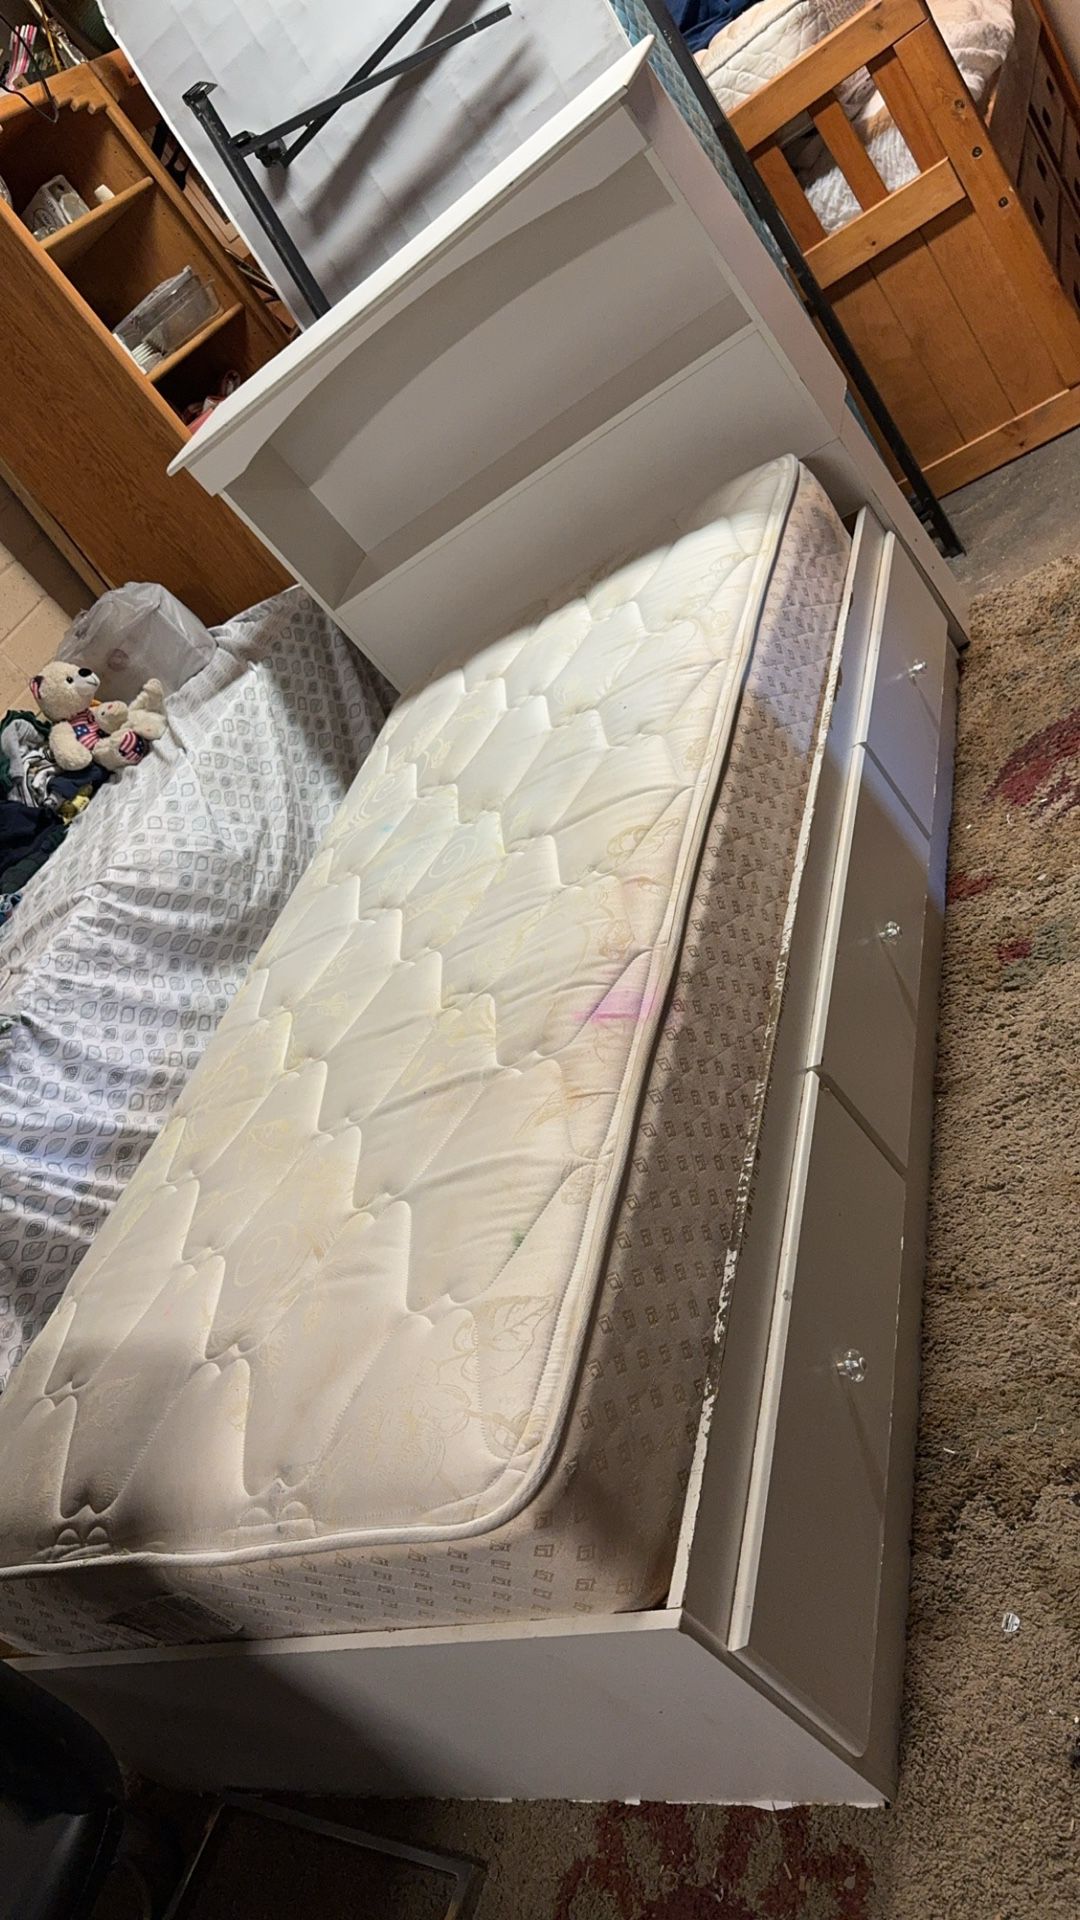 White Twin Bed With Drawers